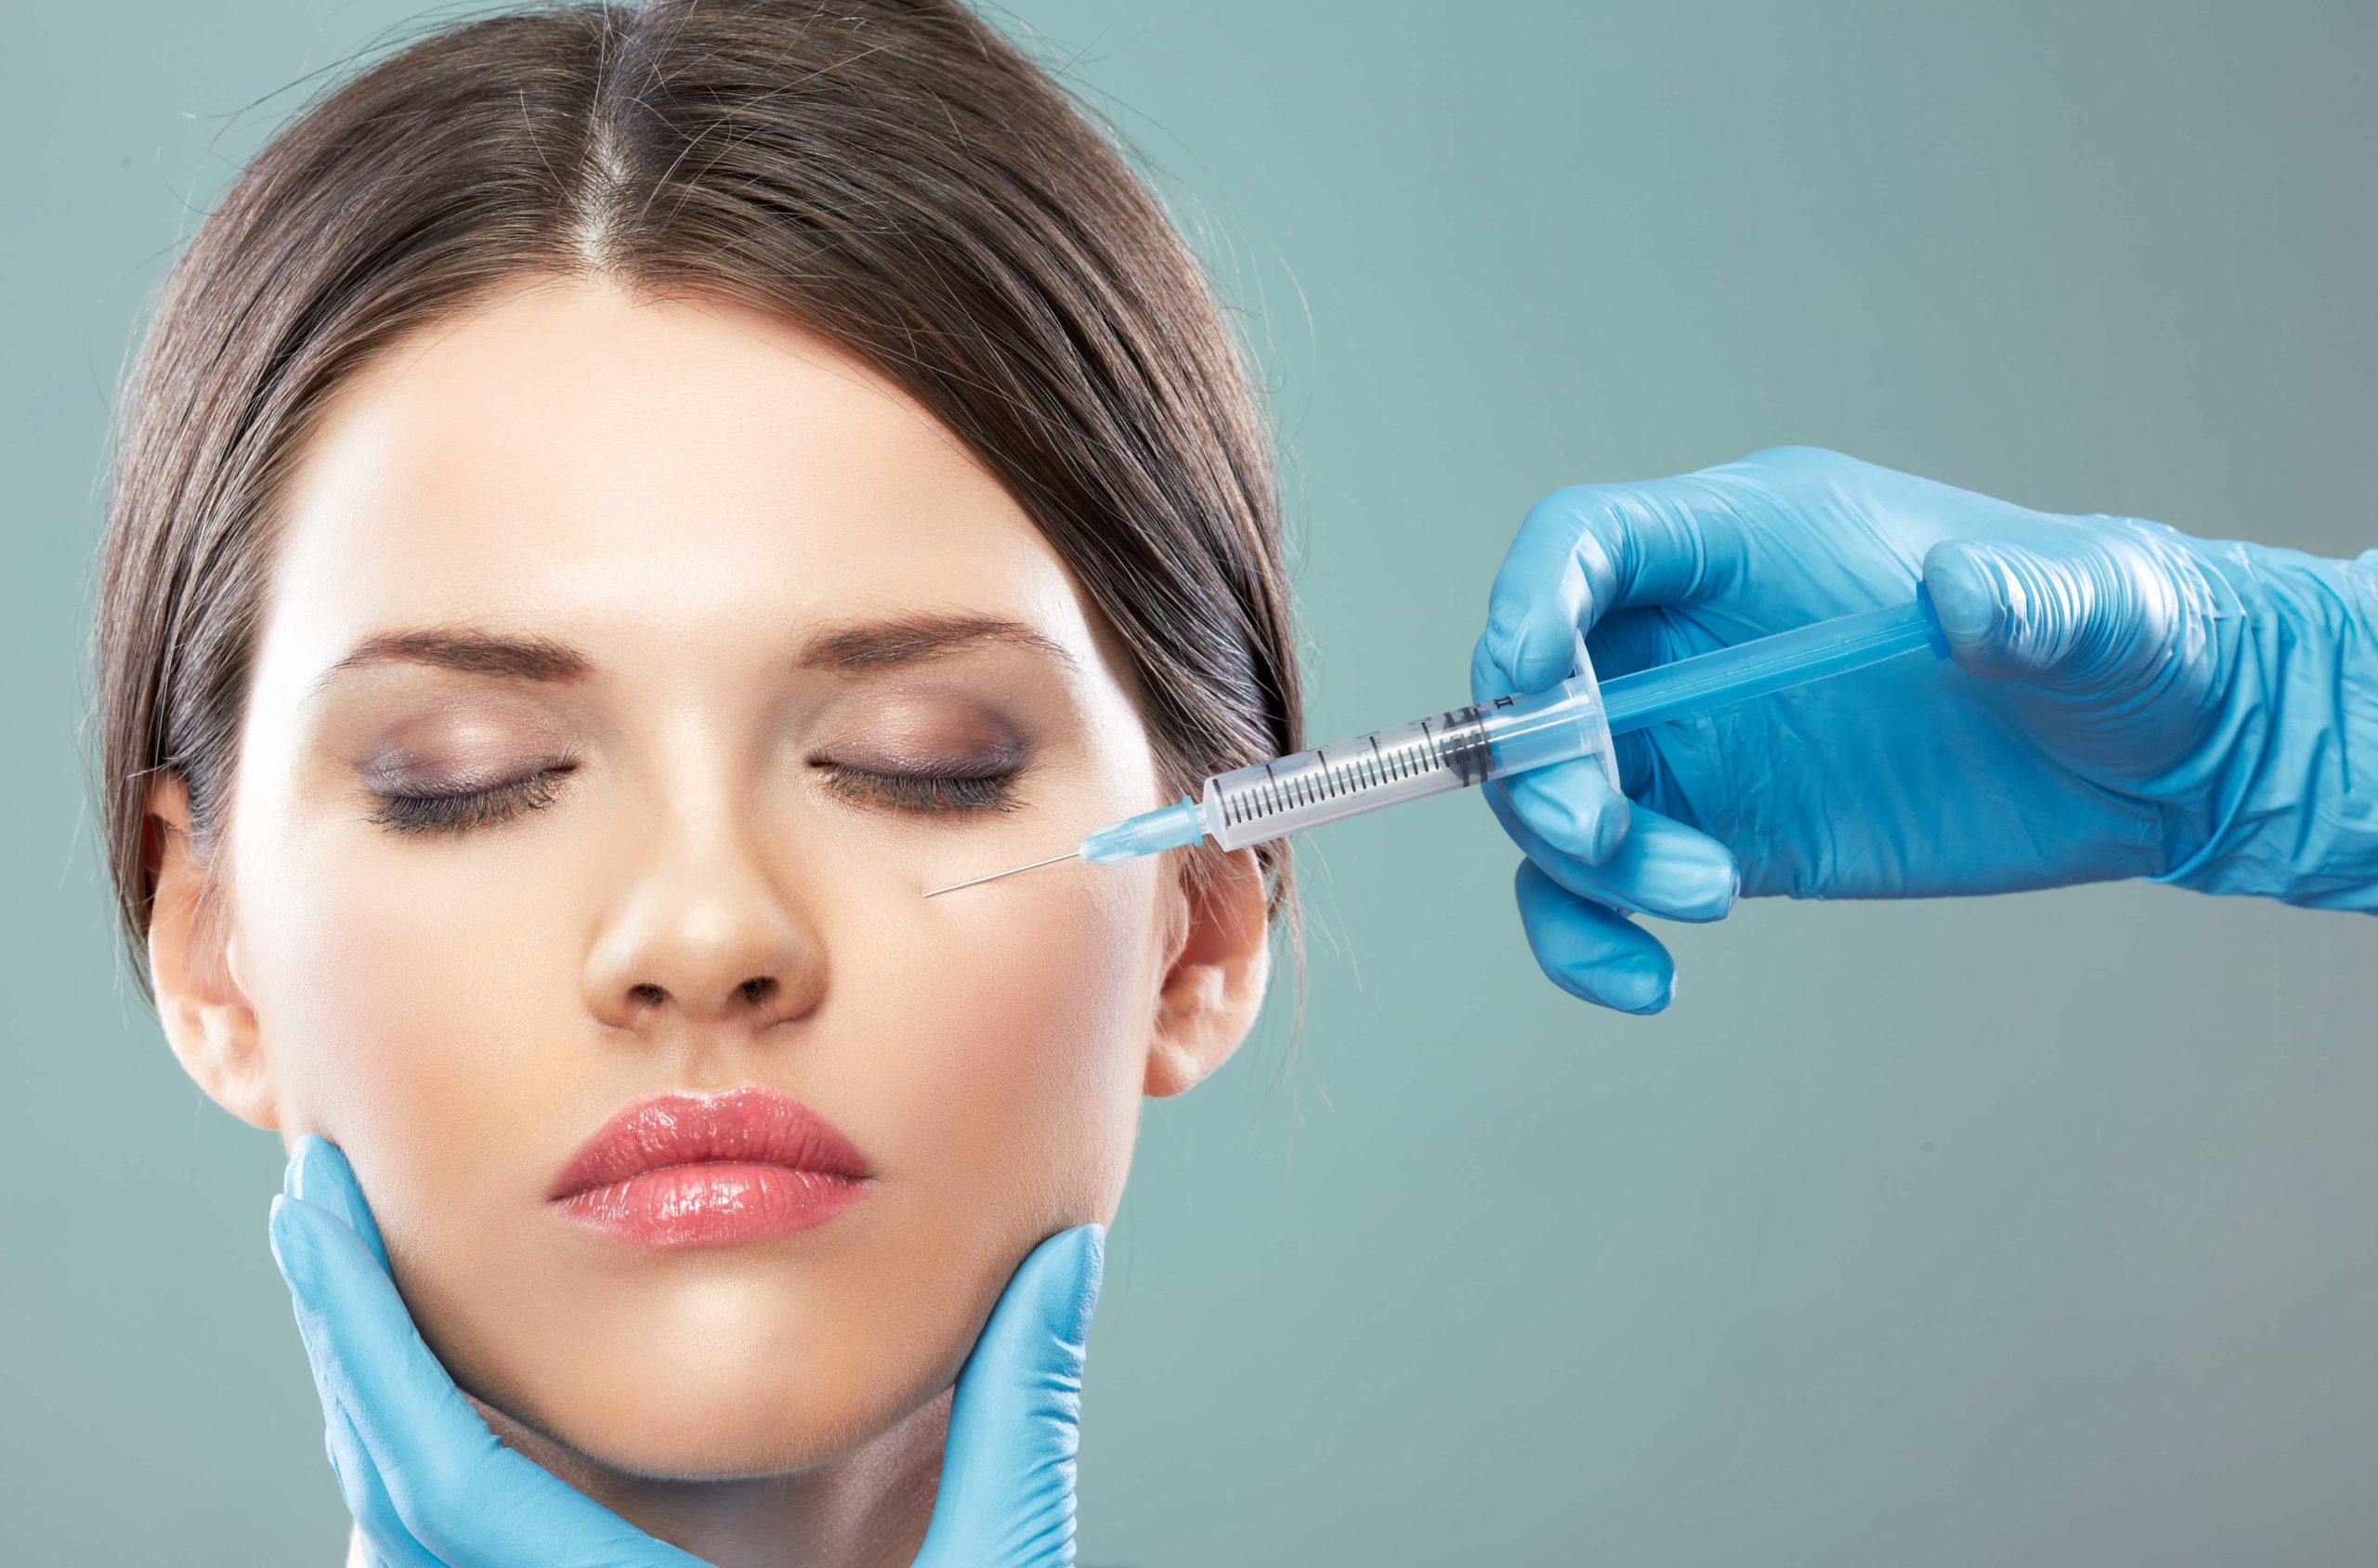 Young women getting Dermal Fillers for a More Youthful Appearance | Vita Aesthetics in Sarasota, FL